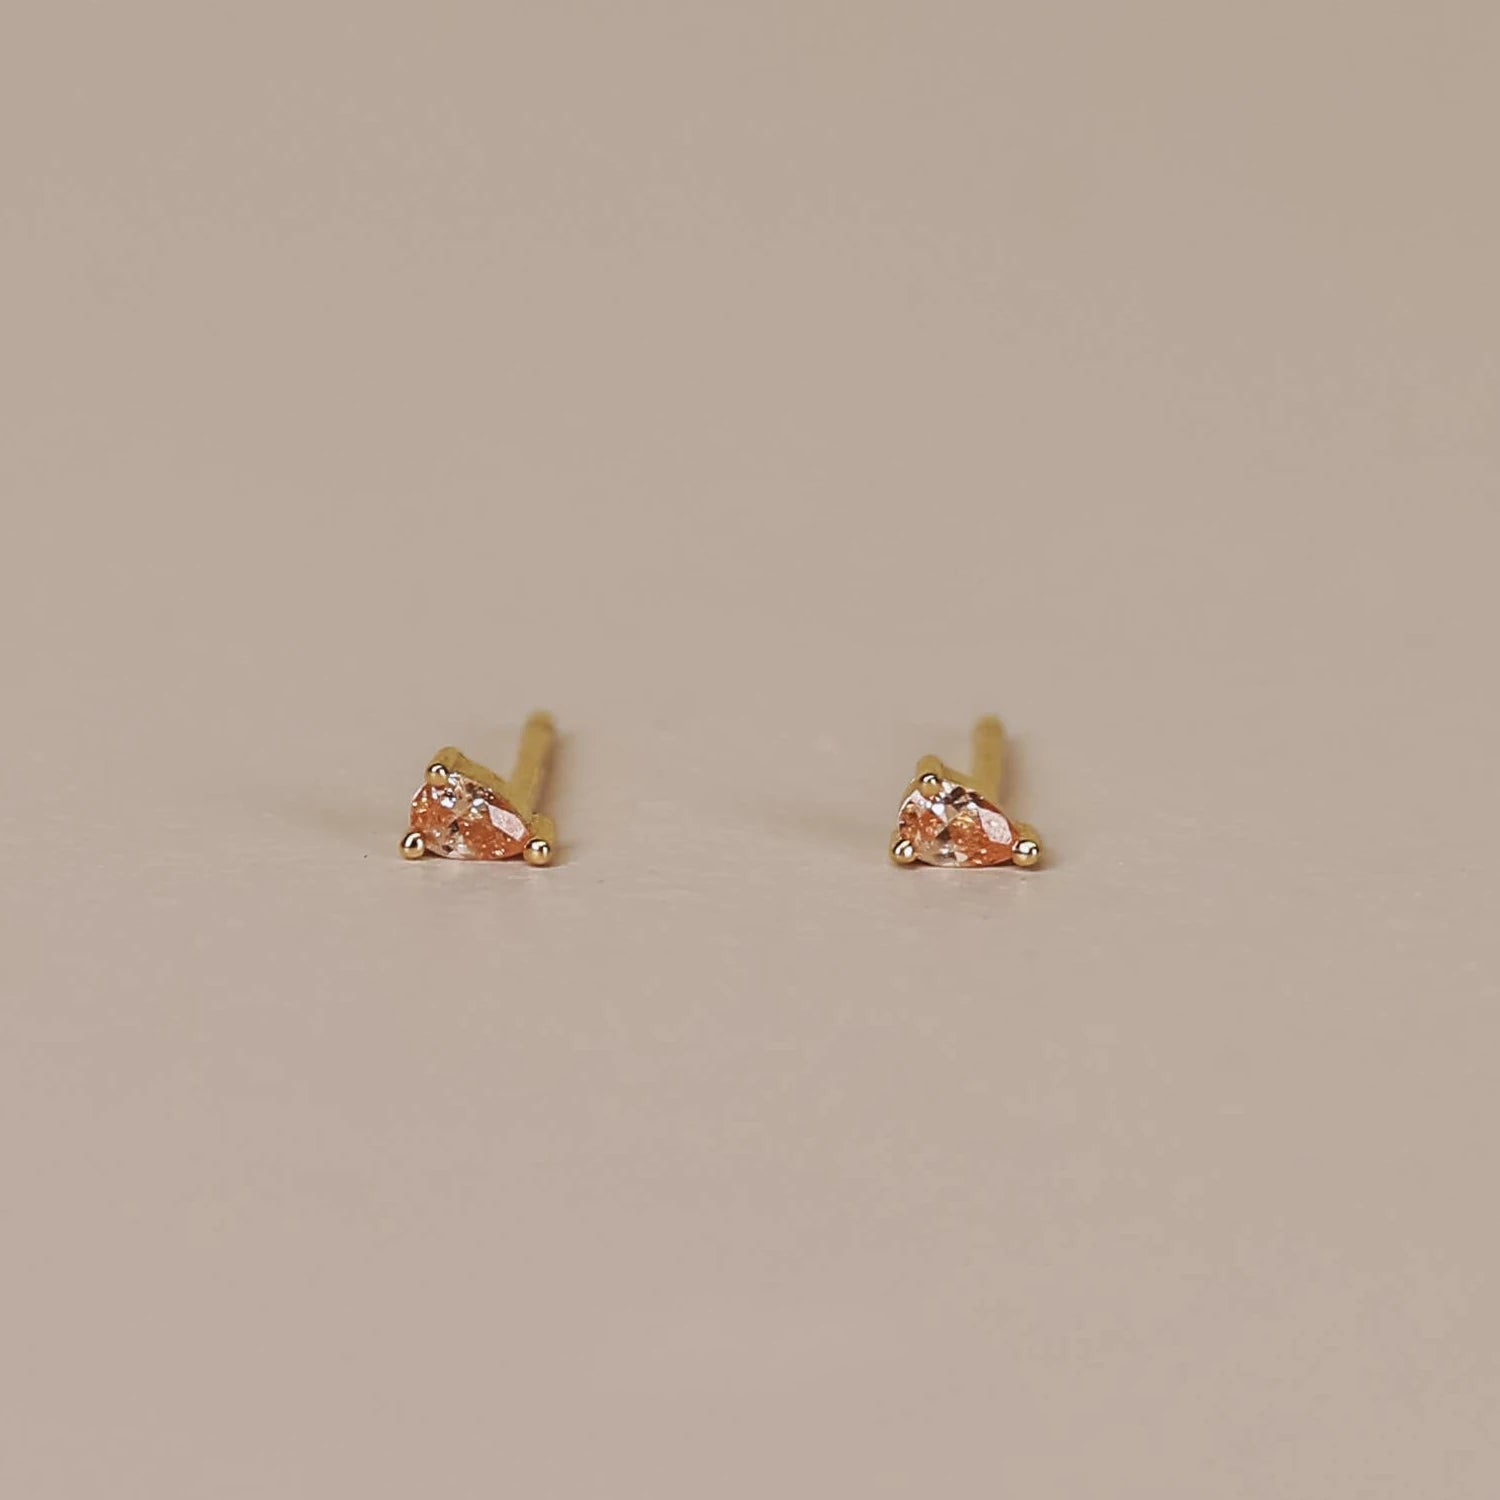 Teadrop champagne colored stud earring. 